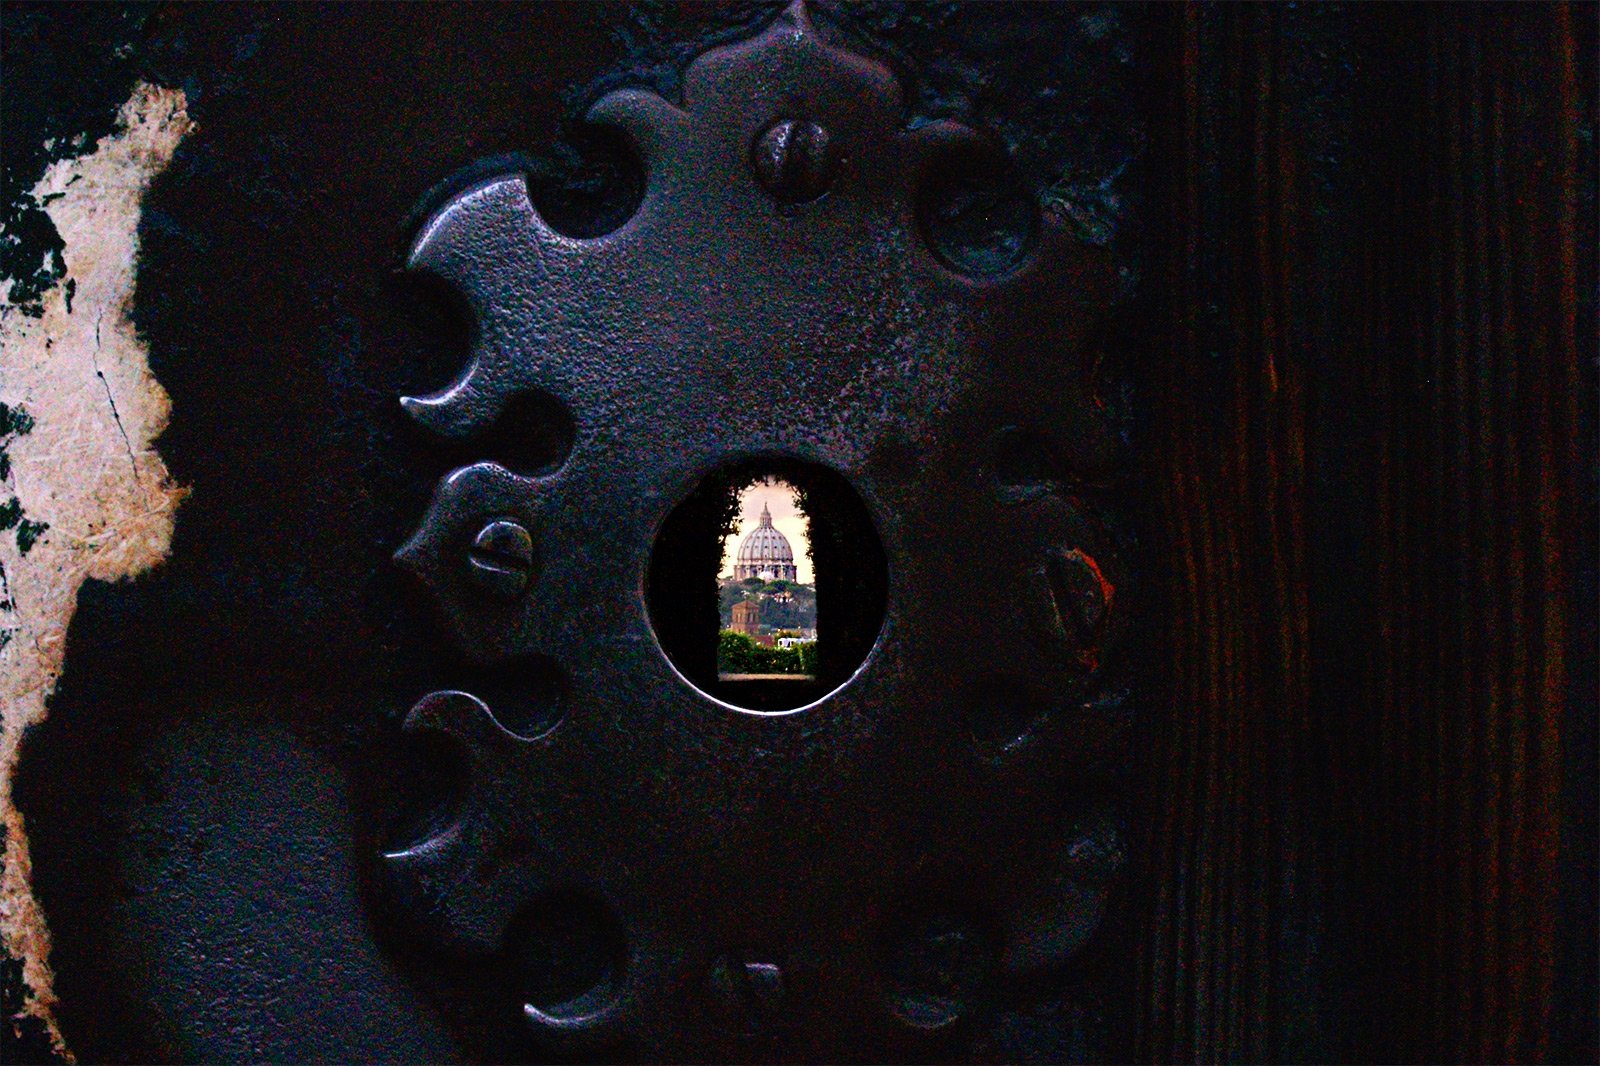 How to peek through the Knights of Malta keyhole in Rome